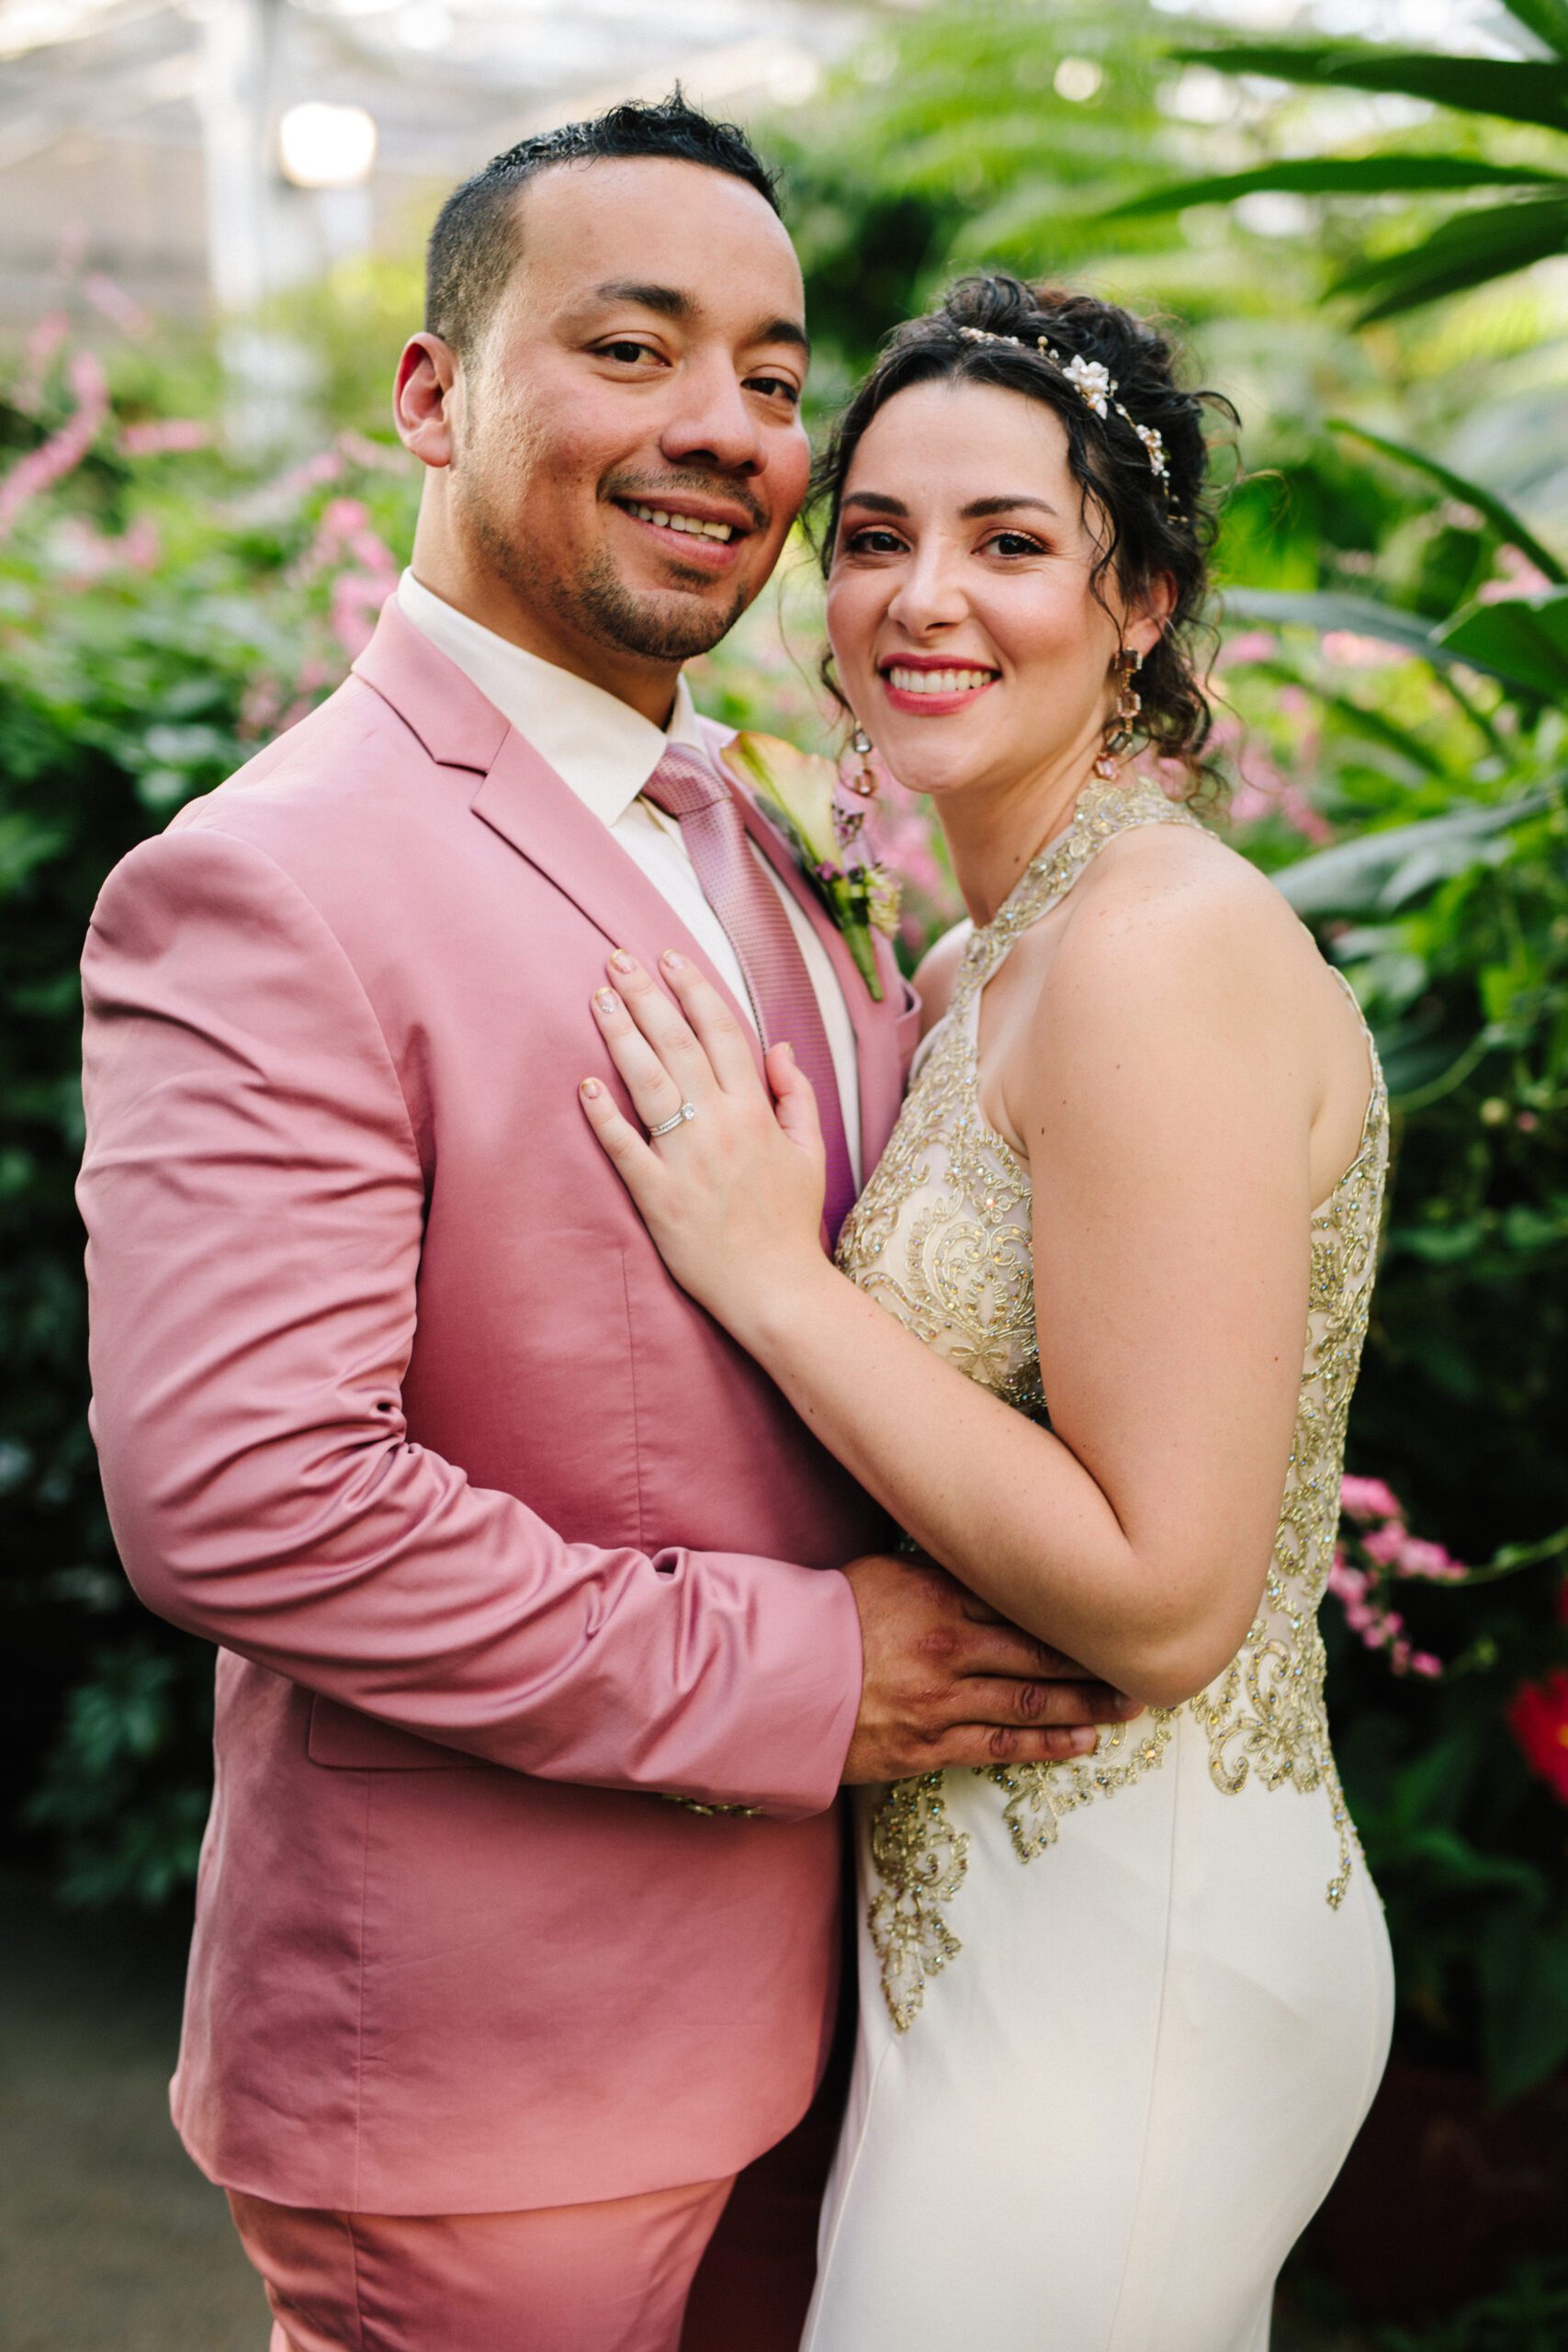 The bride and groom smiling together and looking at the camera after their Butterfly Pavilion Wedding. ⁠